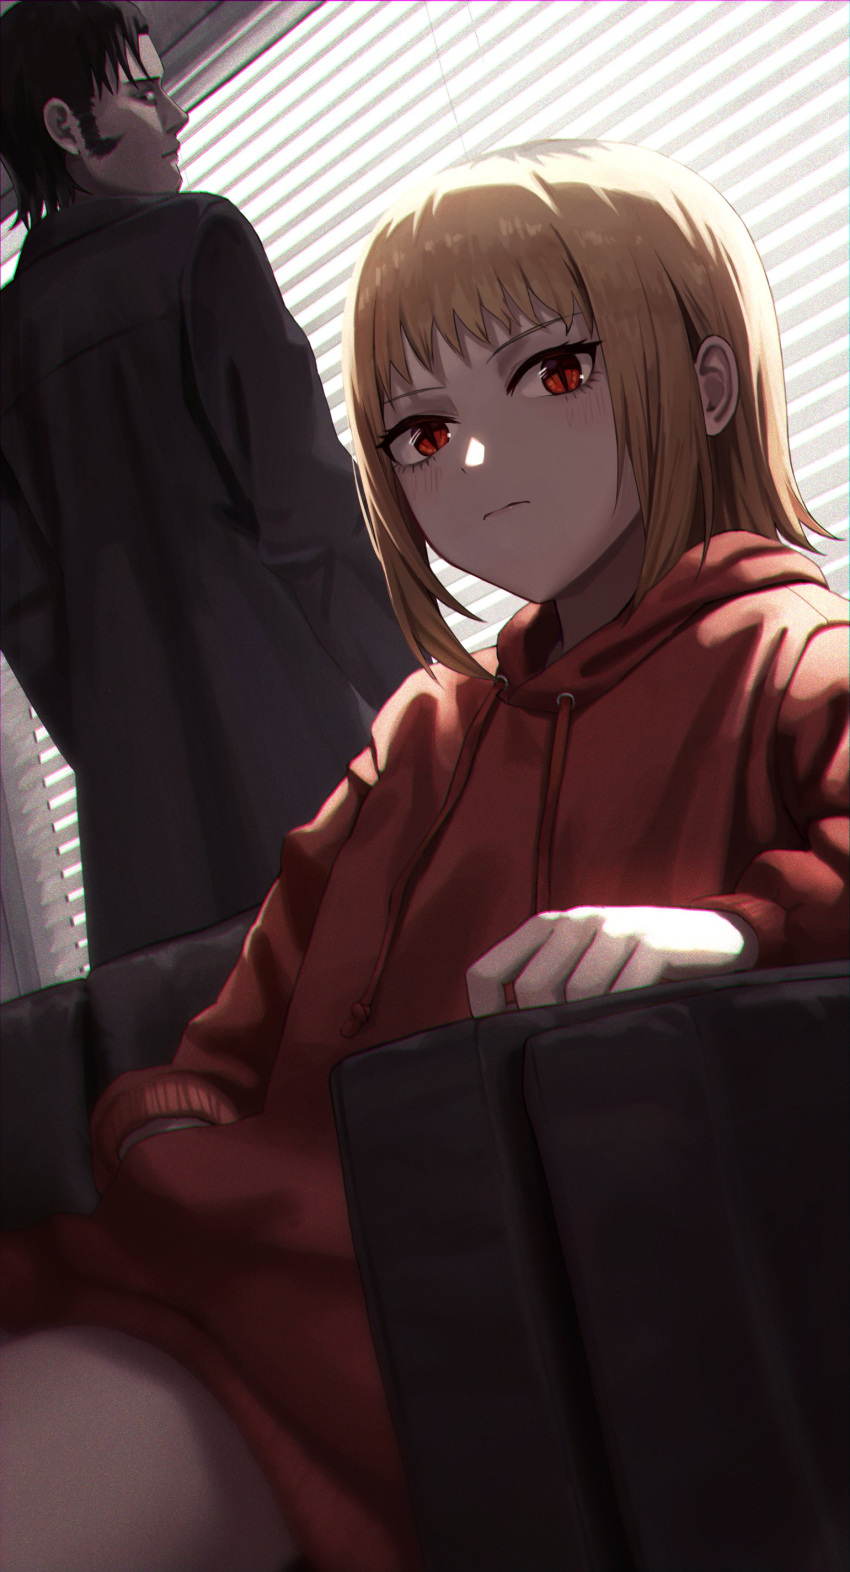 1boy 1girl absurdres akane_sawatari_(chainsaw_man) bangs black_coat blinds blonde_hair chainsaw_man closed_mouth coat couch expressionless hand_in_pocket highres hood hooded_jacket indoors jacket katana_man_(chainsawman) looking_at_viewer red_jacket short_hair sitting slit_pupils standing tare_negima window